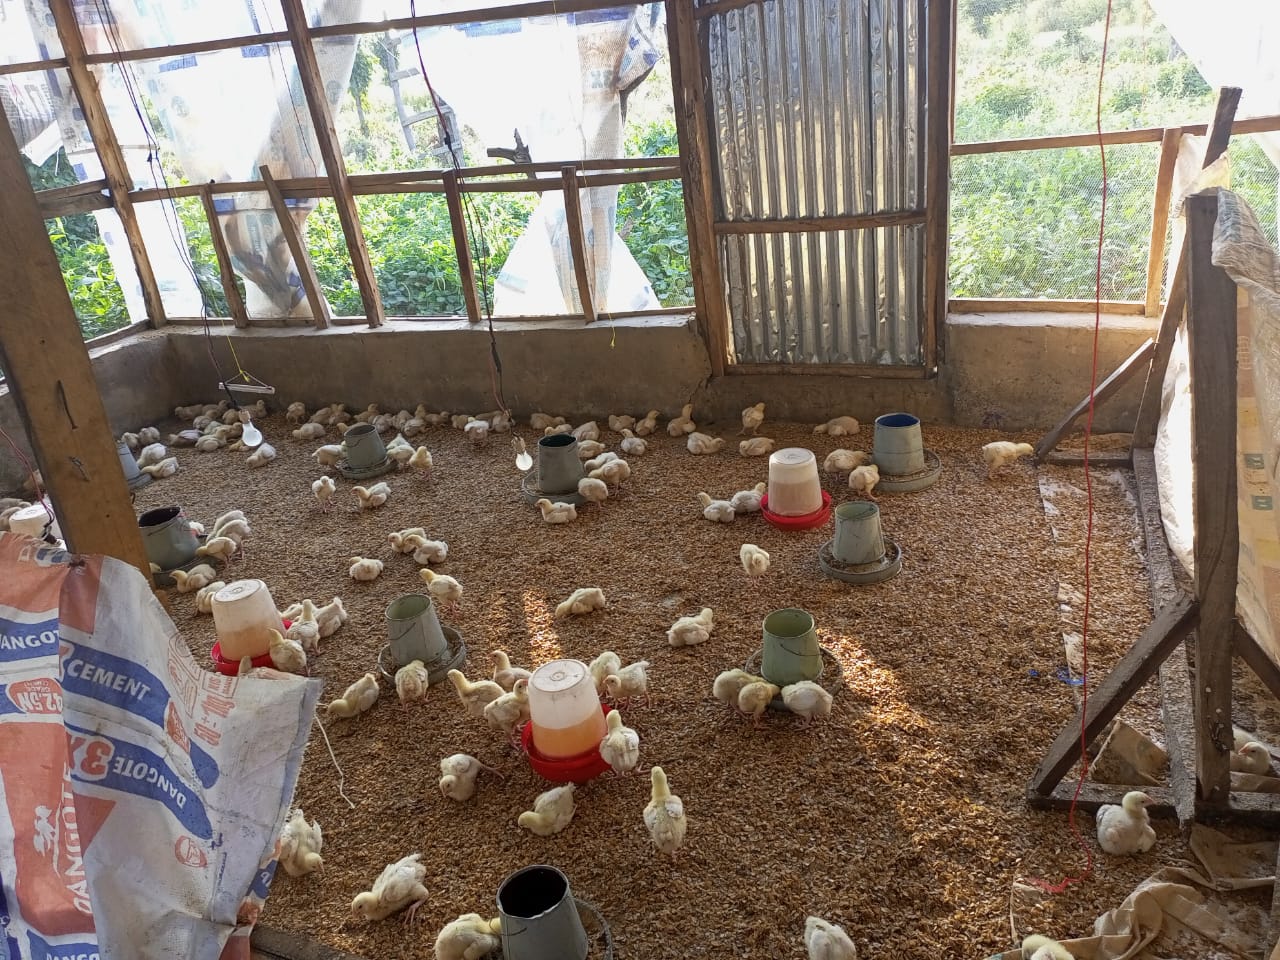 poultry farming business plan in south africa